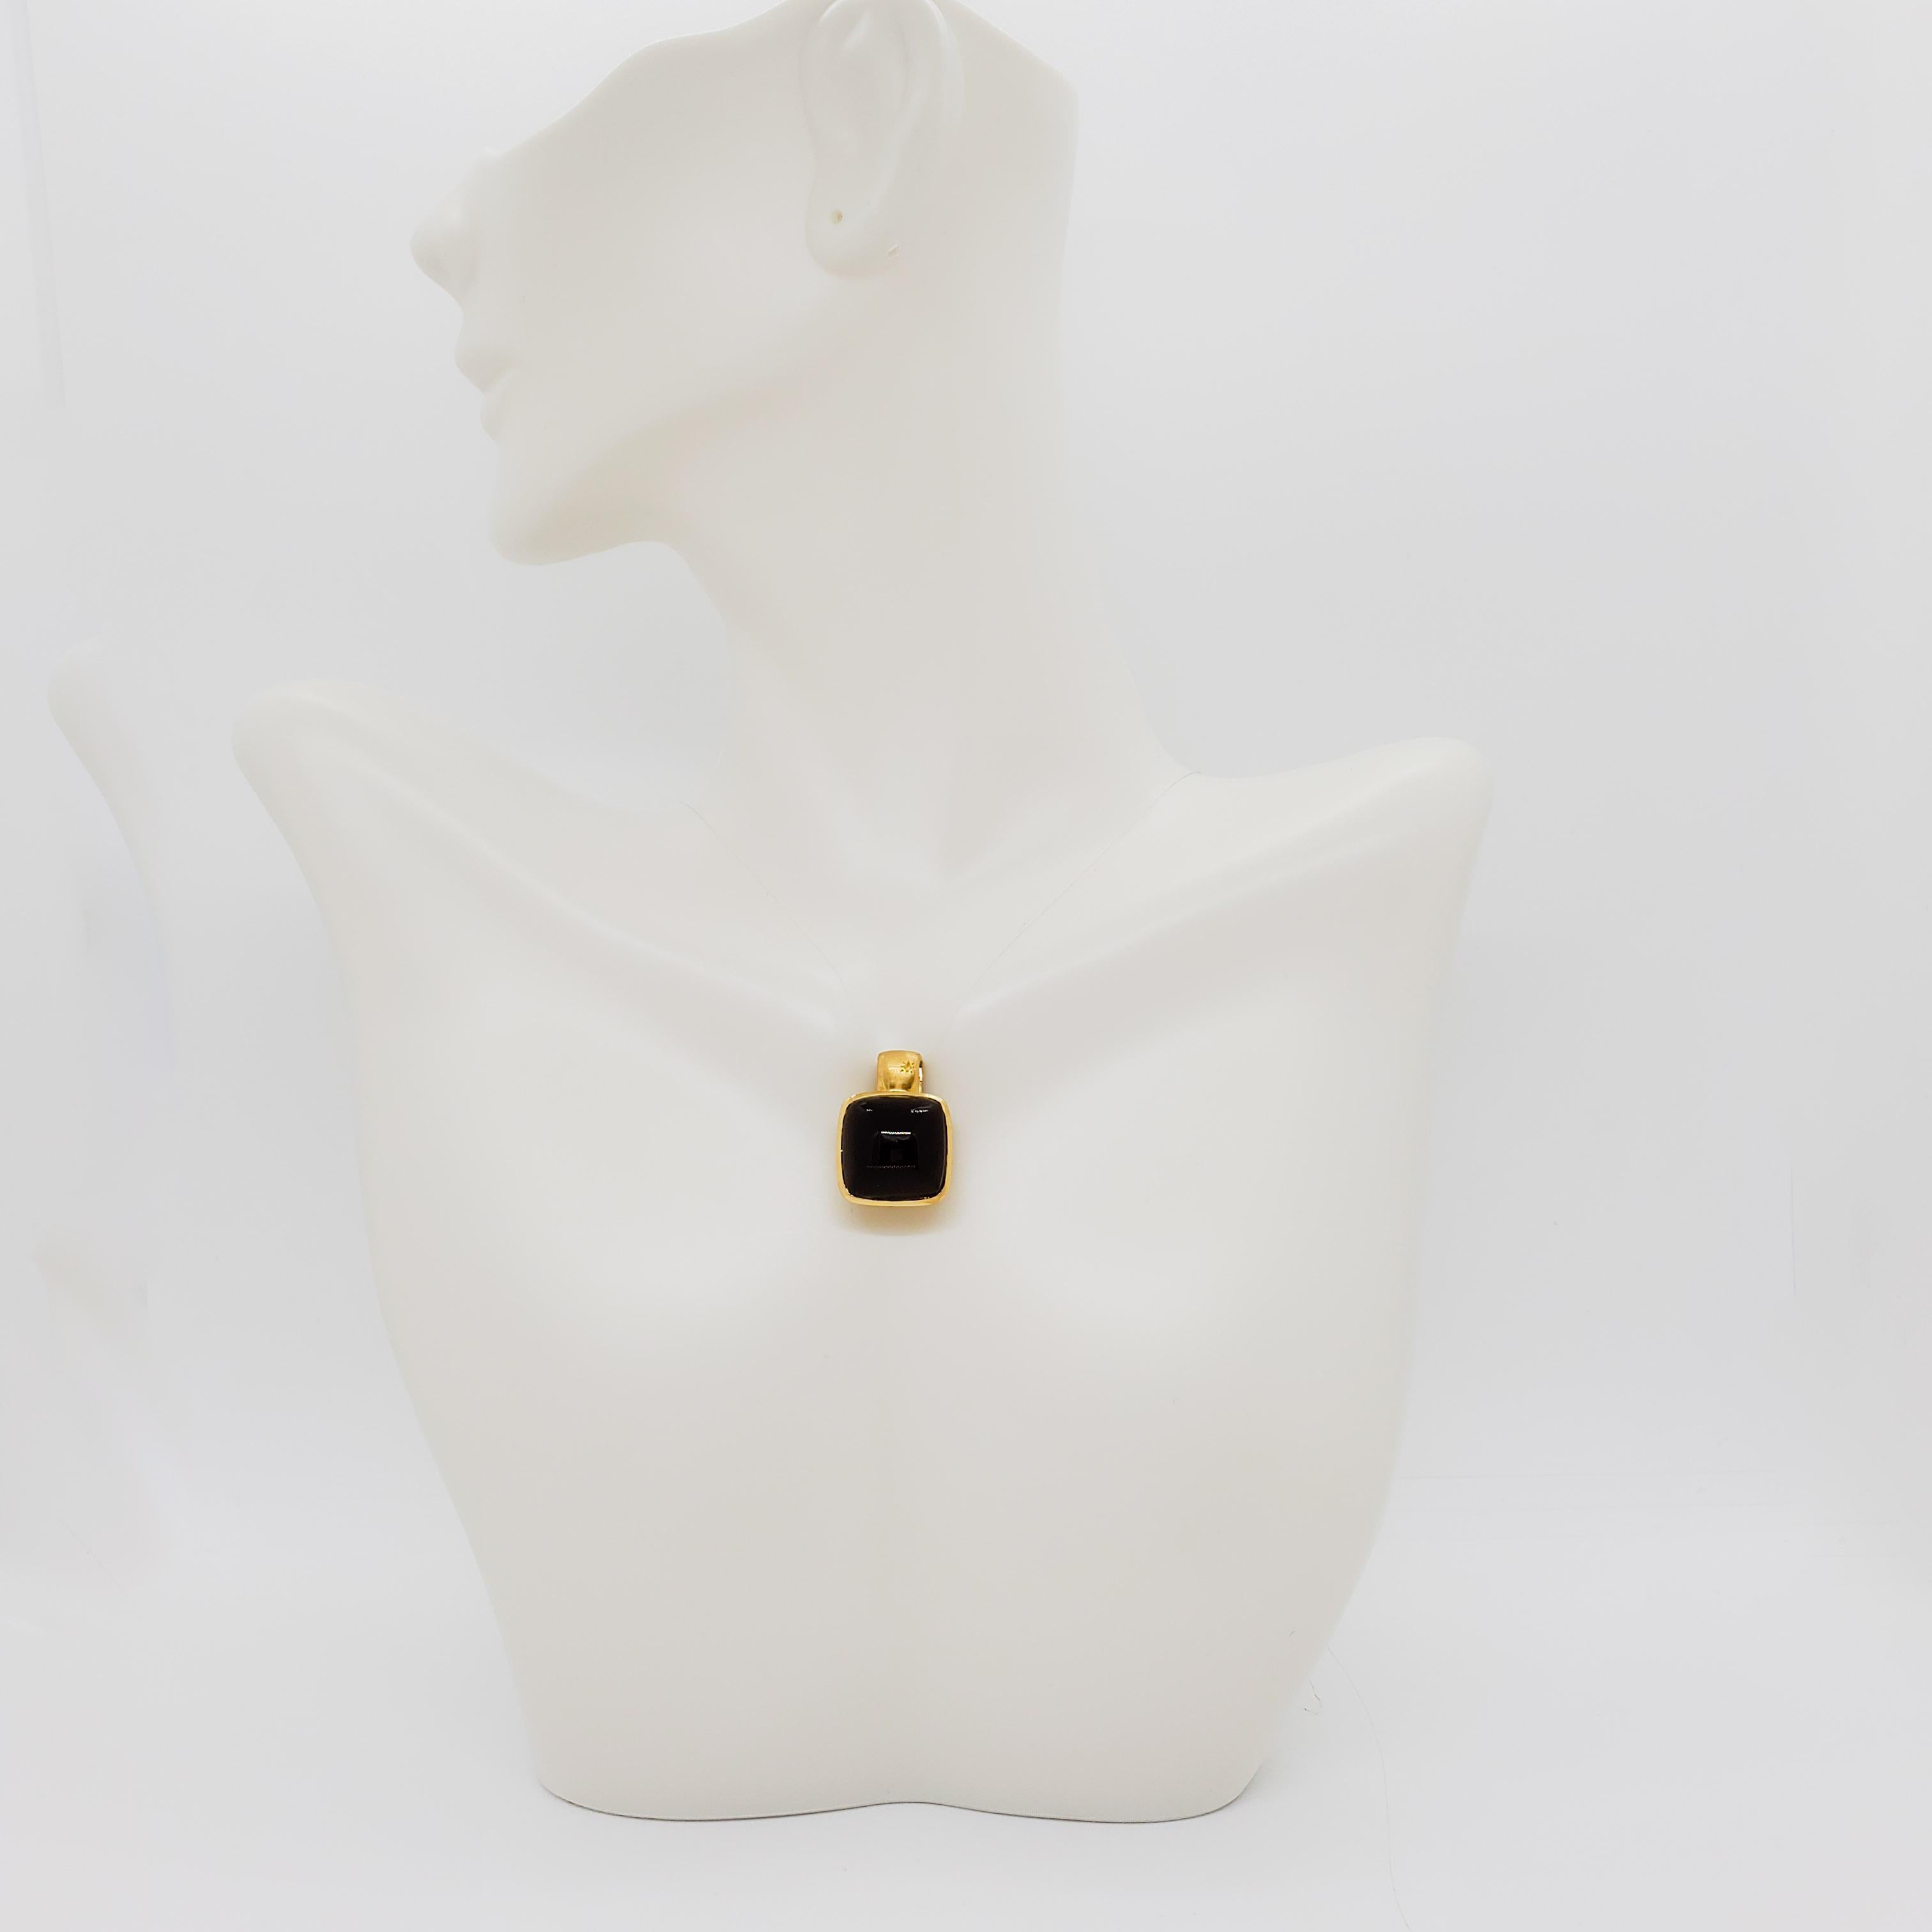 Beautiful H. Stern pendant with a 5.00 ct. smoky quartz square cabochon in a handmade 18k yellow gold mounting.  Chain is not included.